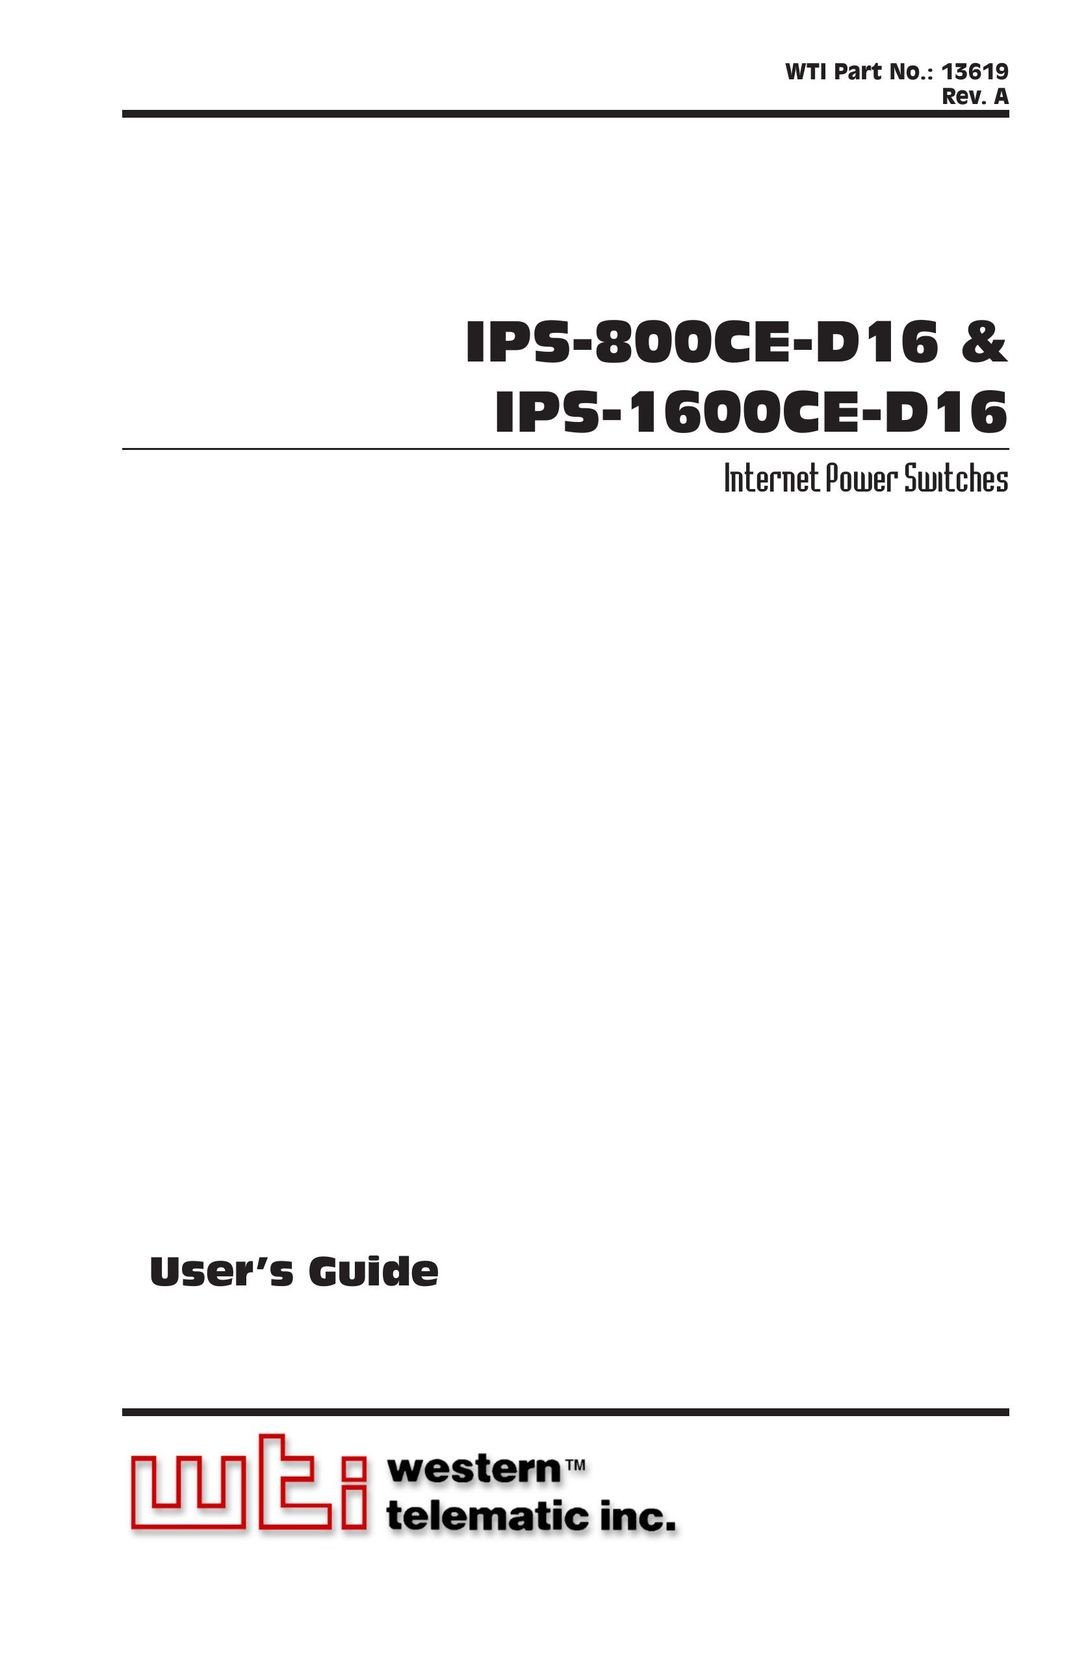 Western Telematic IPS-800CE-D16, IPS-1600CE-D16 Switch User Manual